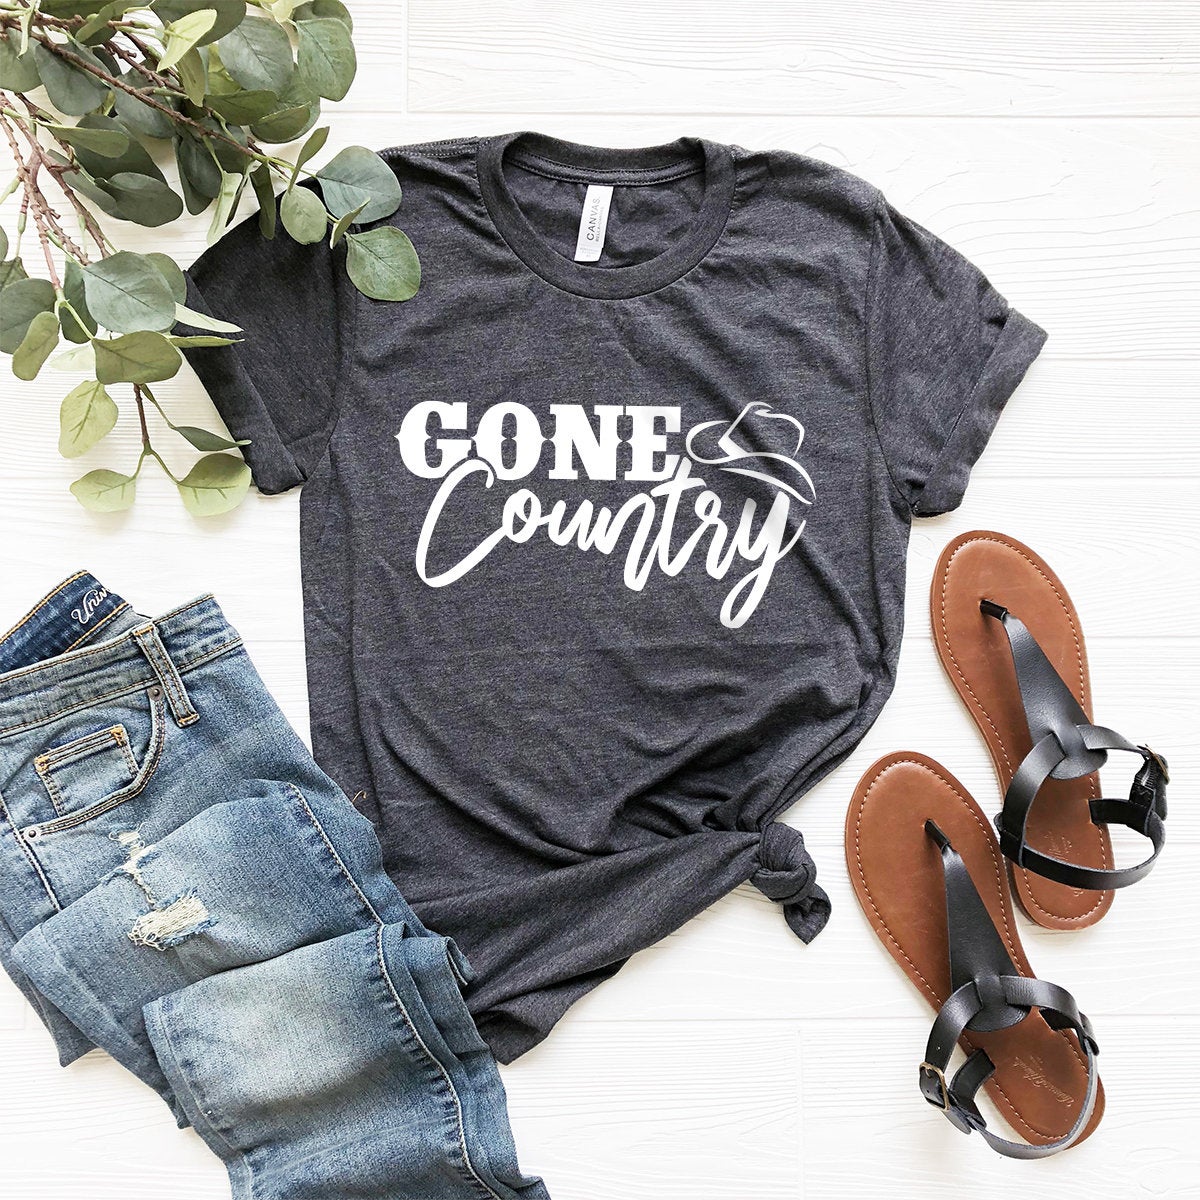 Gone Country, Country Girl Shirt, Country Boy Shirt, Western Shirt, Western Graphic Tee, Southern Shirt, Country T-Shirt, Cowgirl T-Shirt - Fastdeliverytees.com